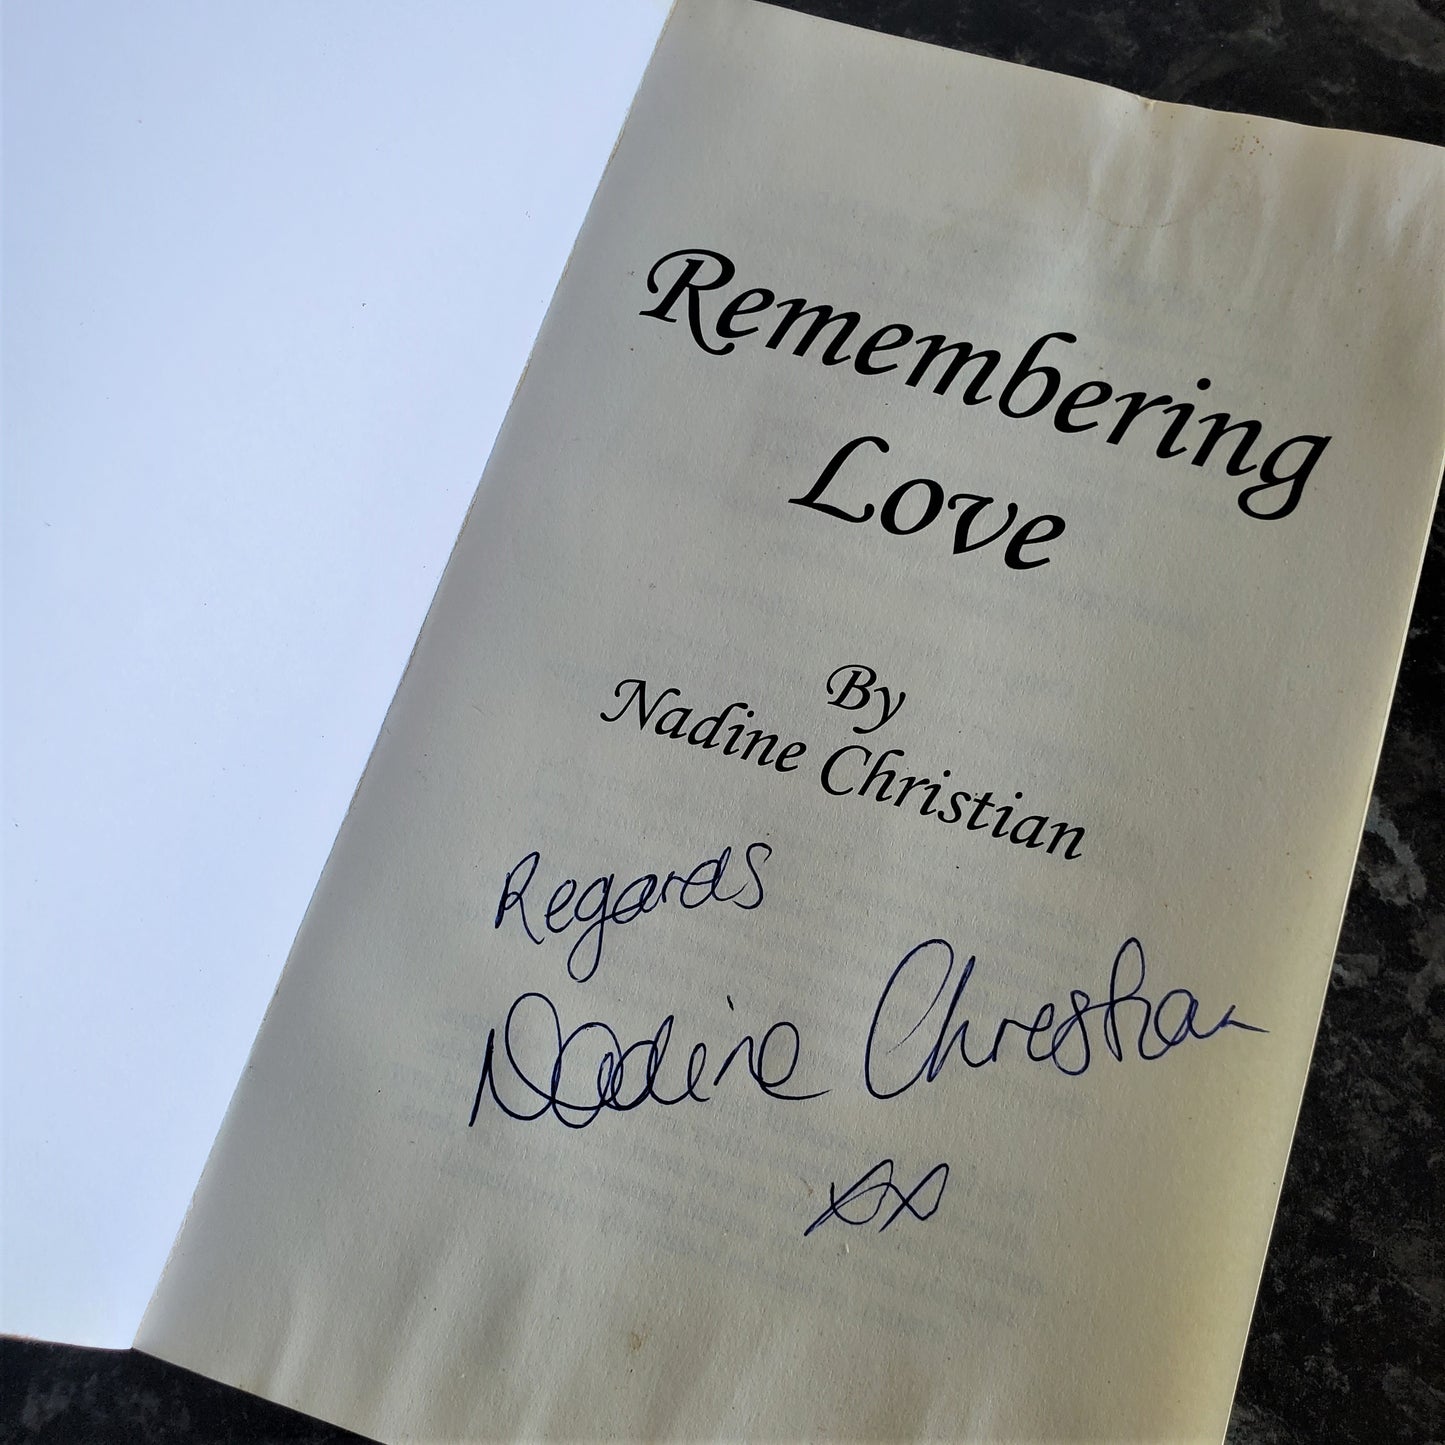 Remembering Love -  Signed by author Nadine Christian (now Faulkner)